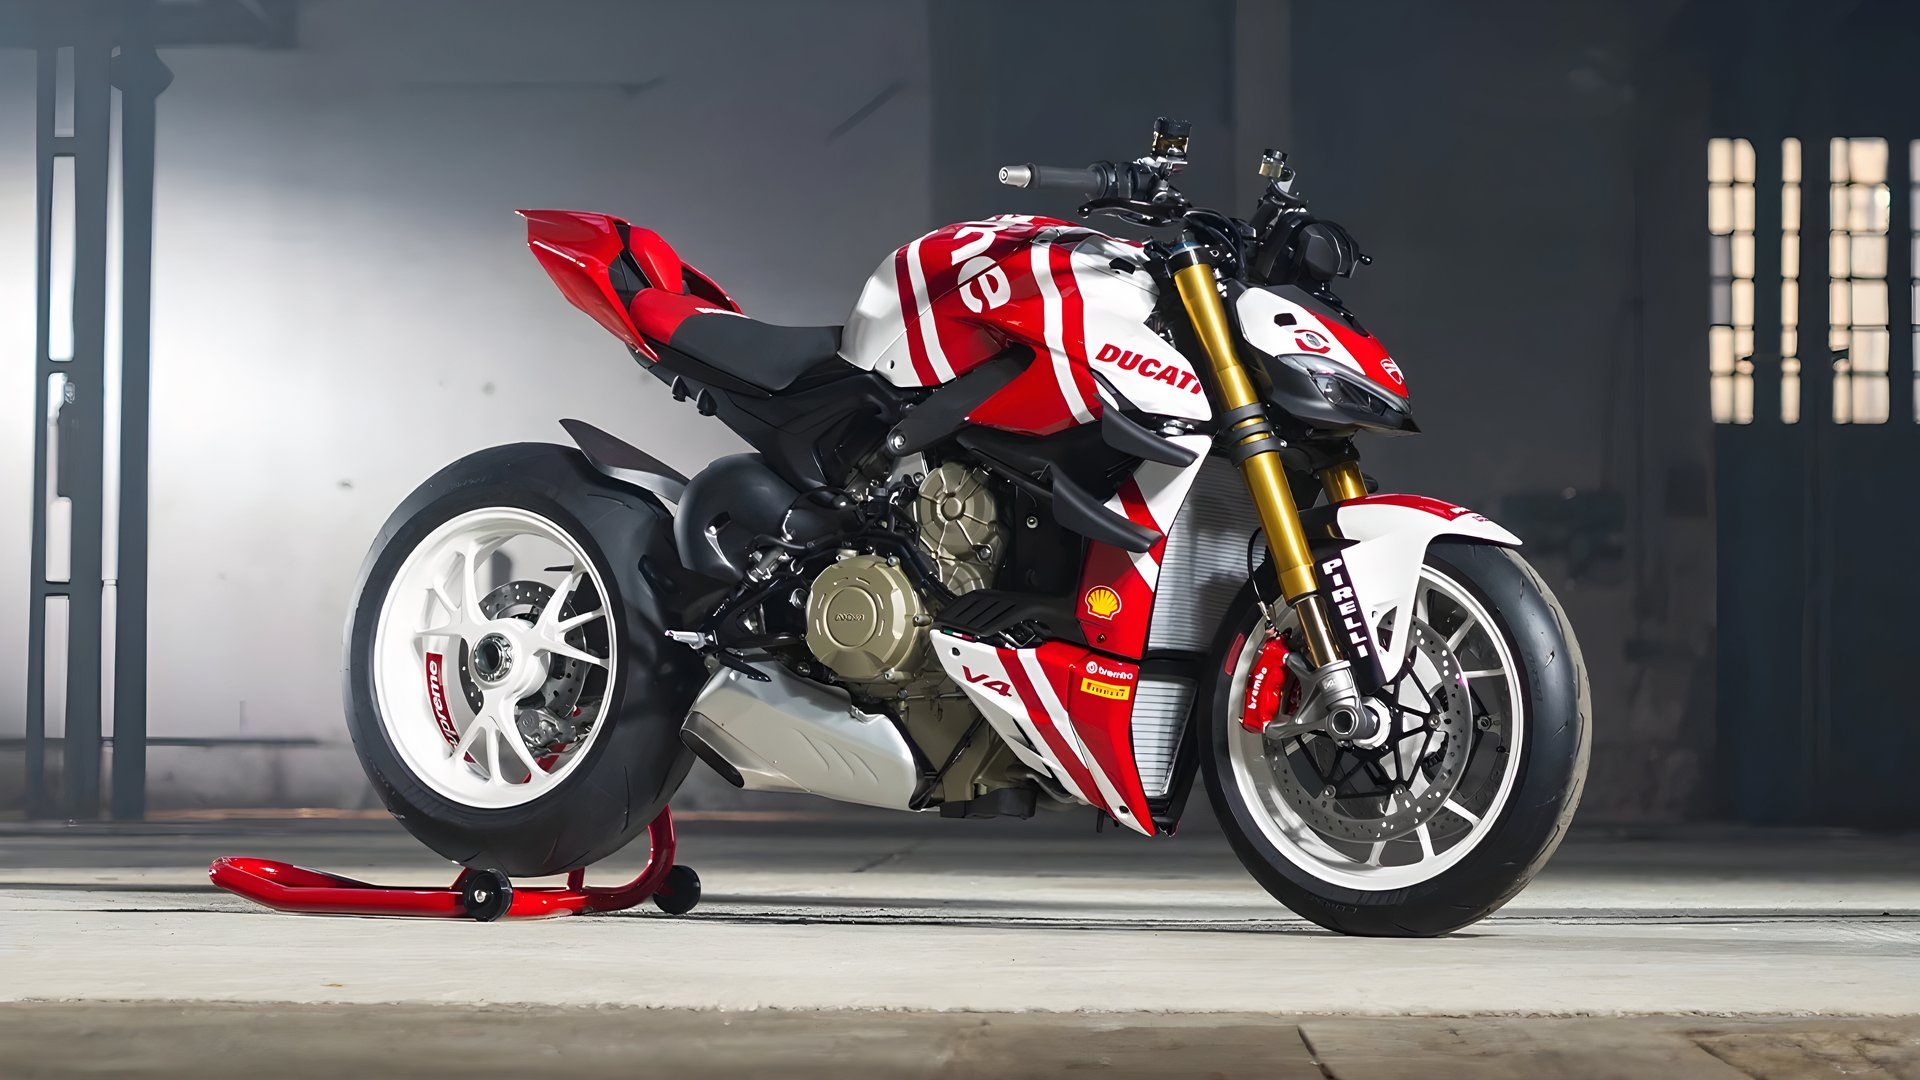 Ducati 'Supreme' Streetfighter V4 Clubs Fashion With 208 HP